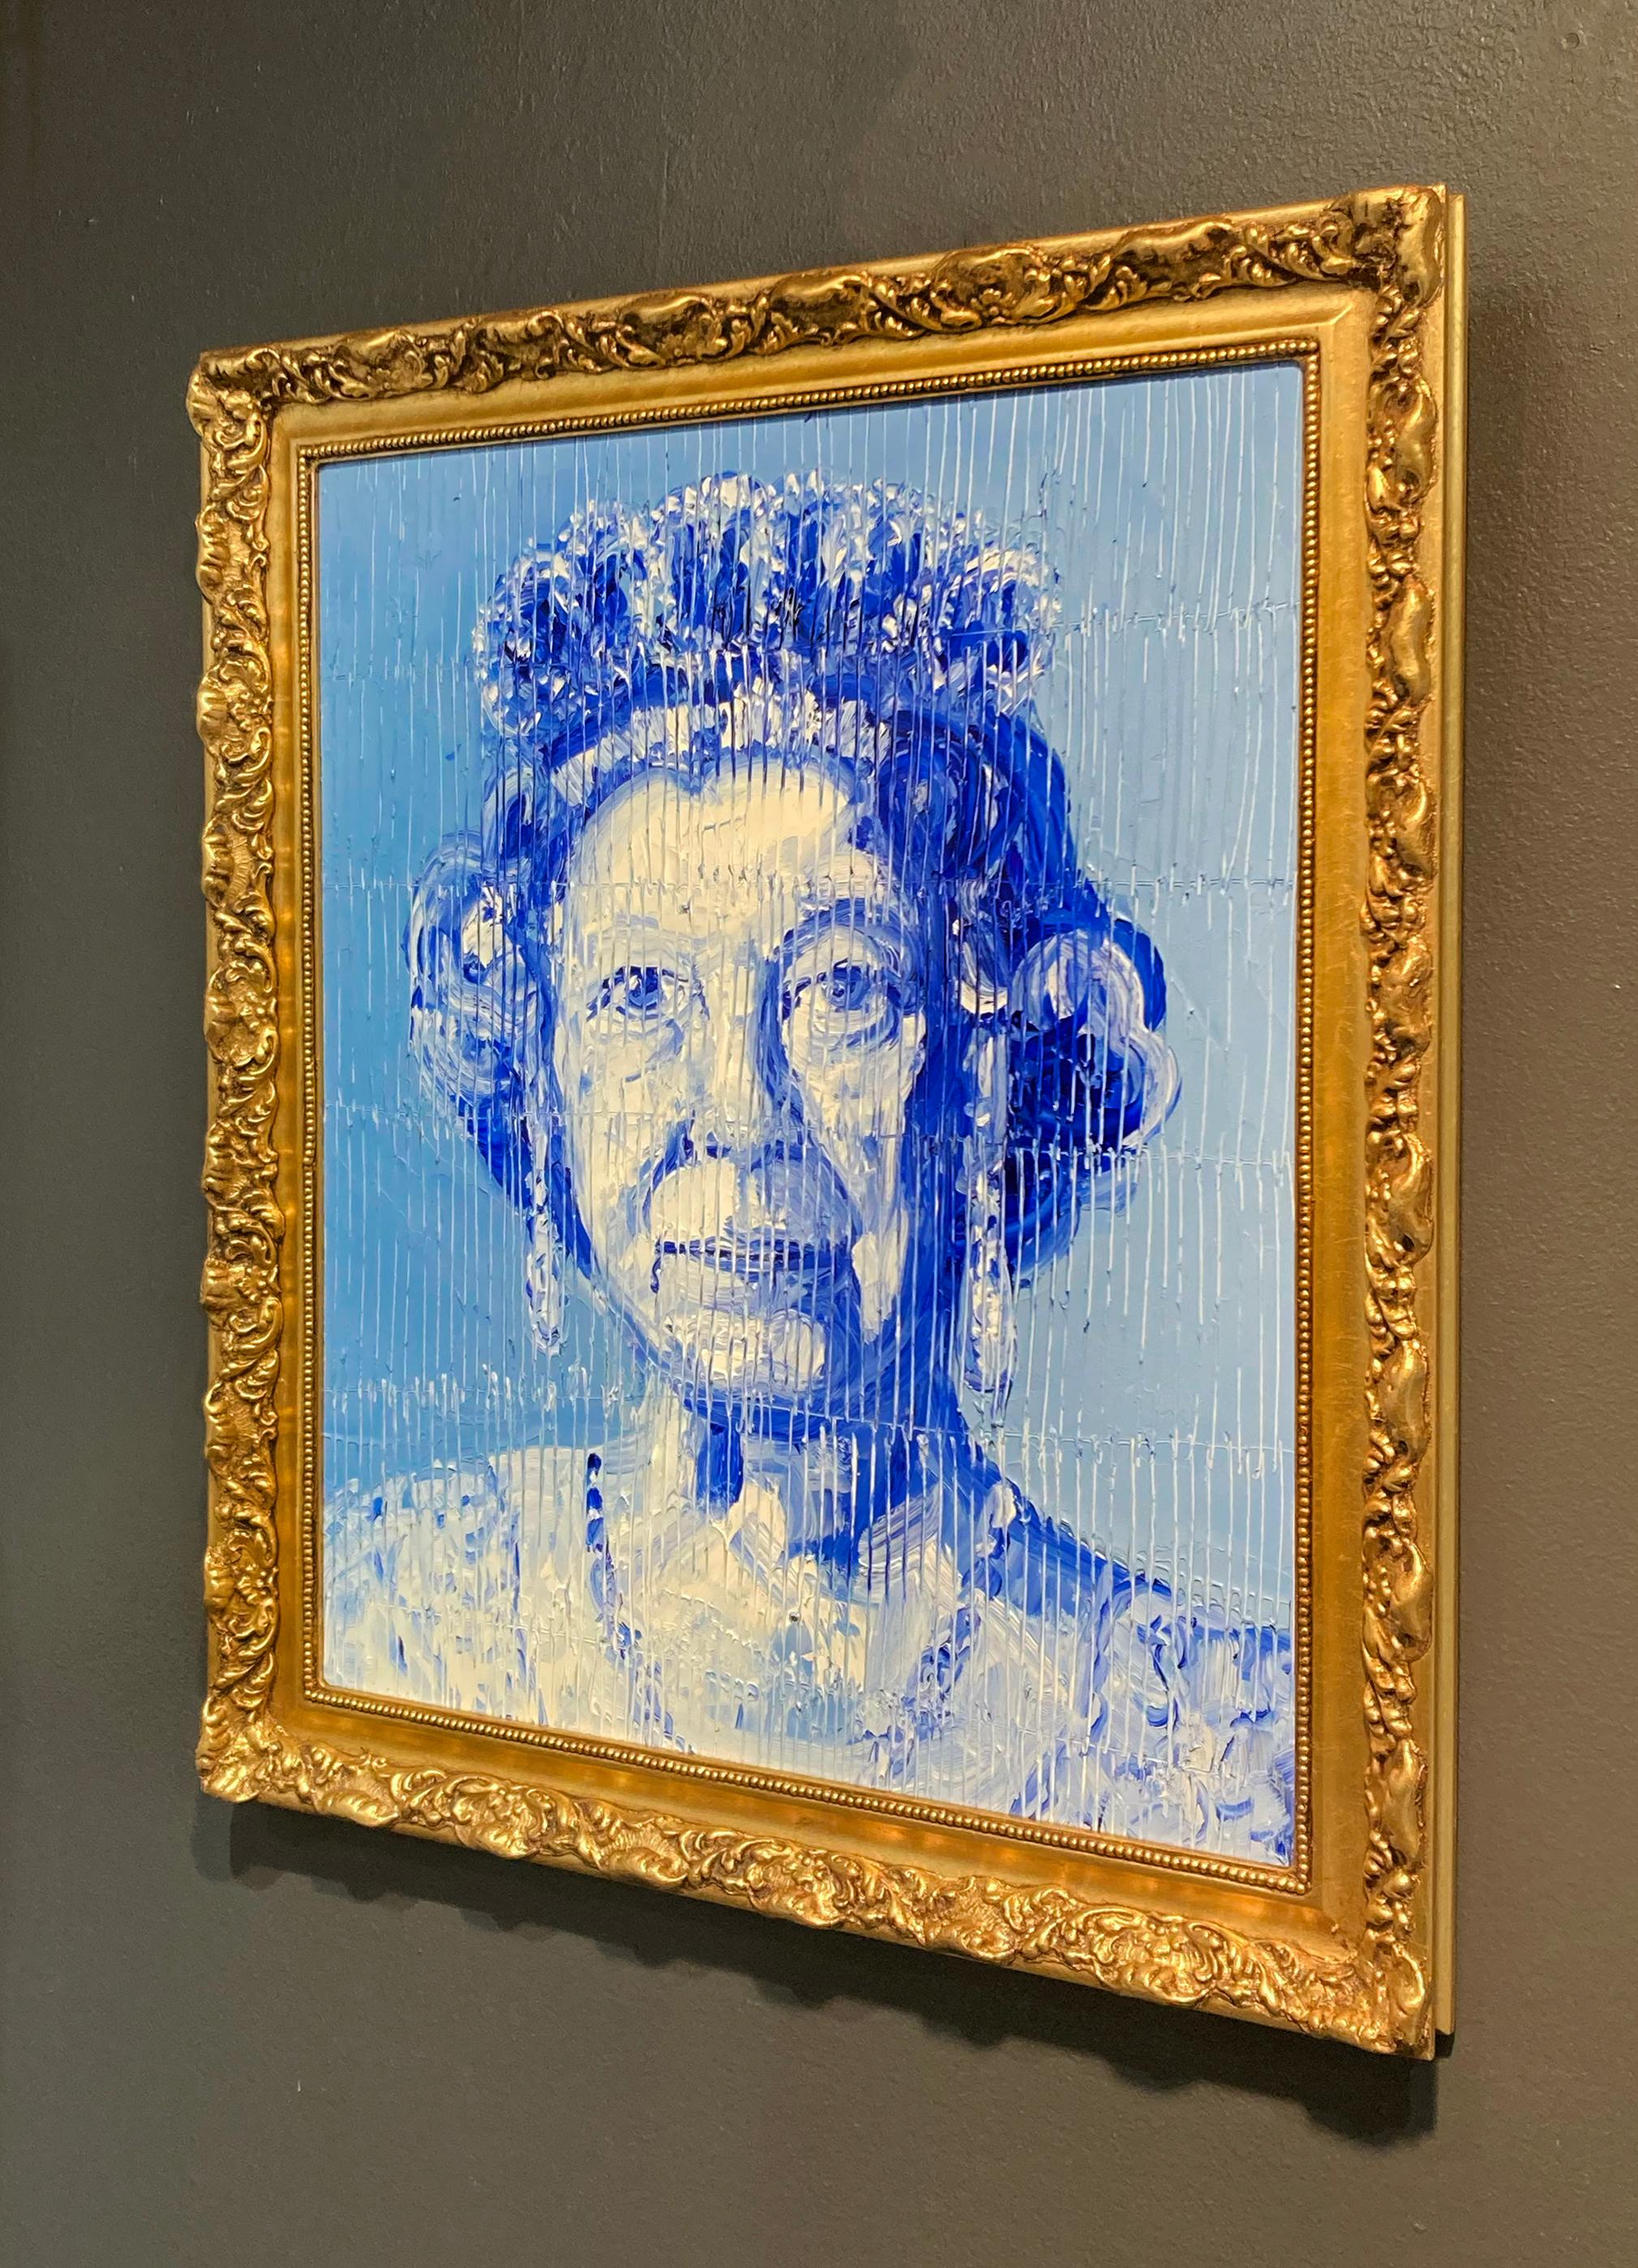 Her Majesty Queen Elizabeth - Contemporary Painting by Hunt Slonem